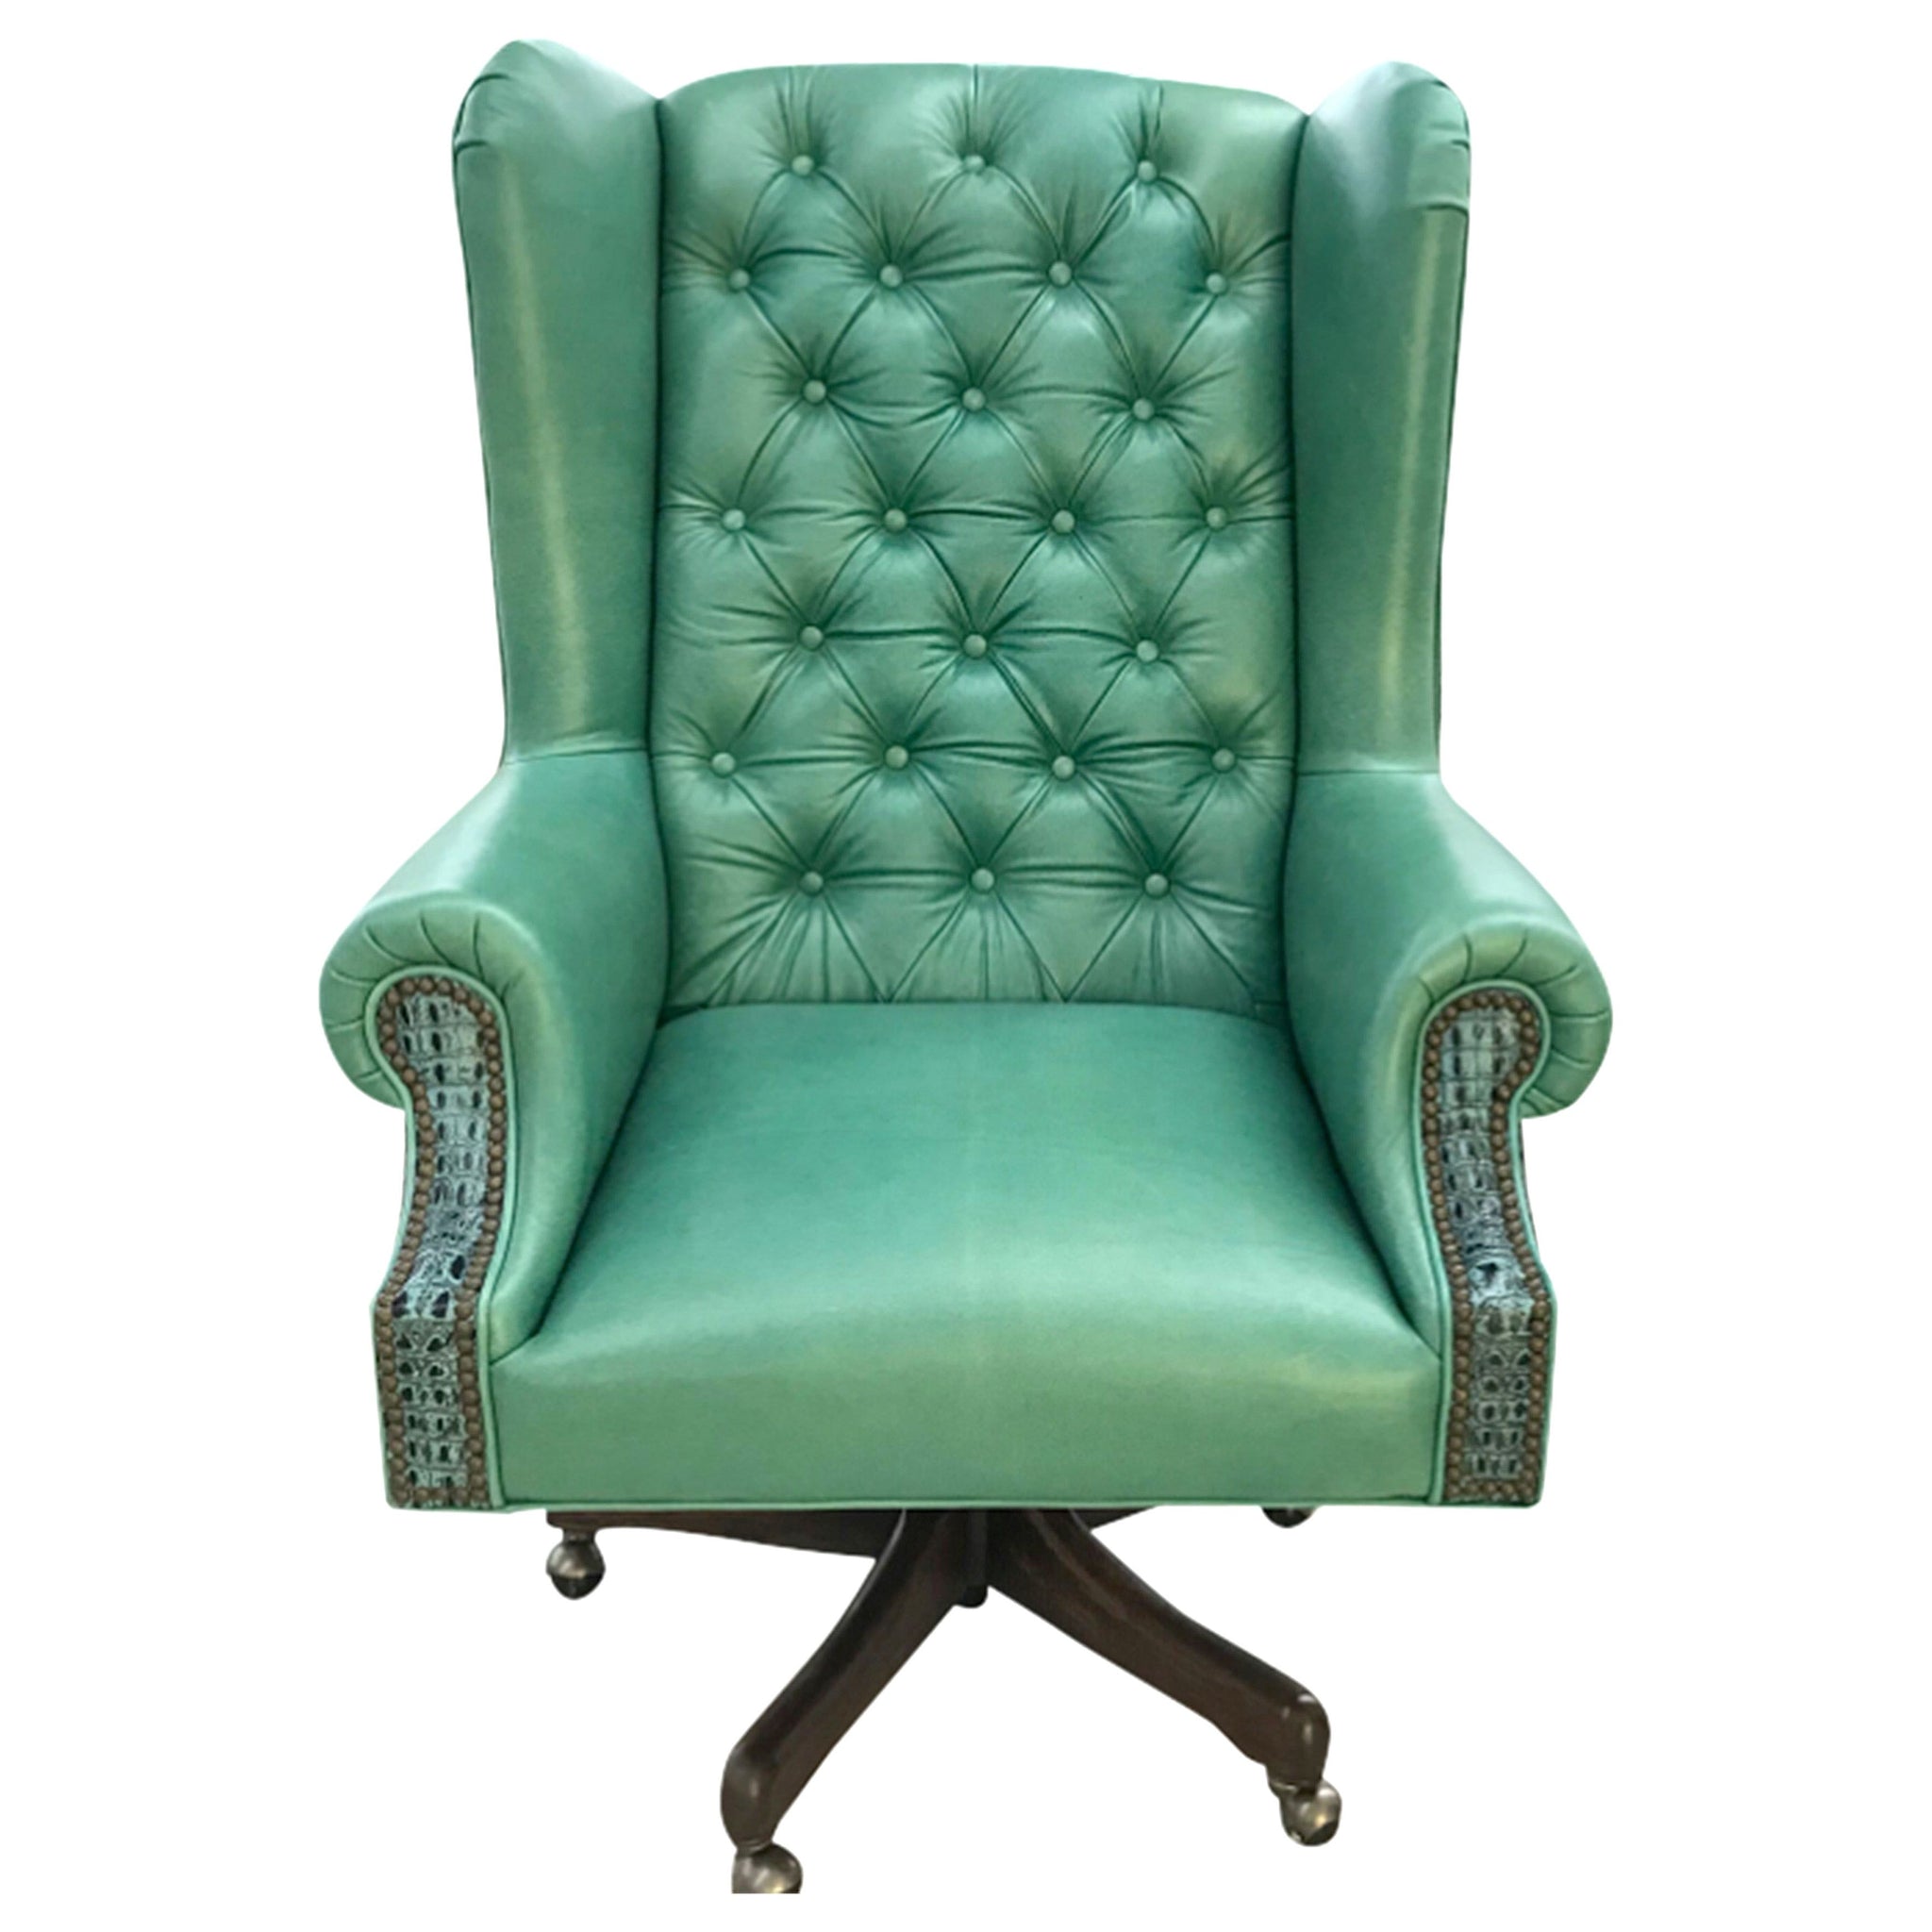 Albuquerque Turquoise Western Leather Executive Chair Great Blue